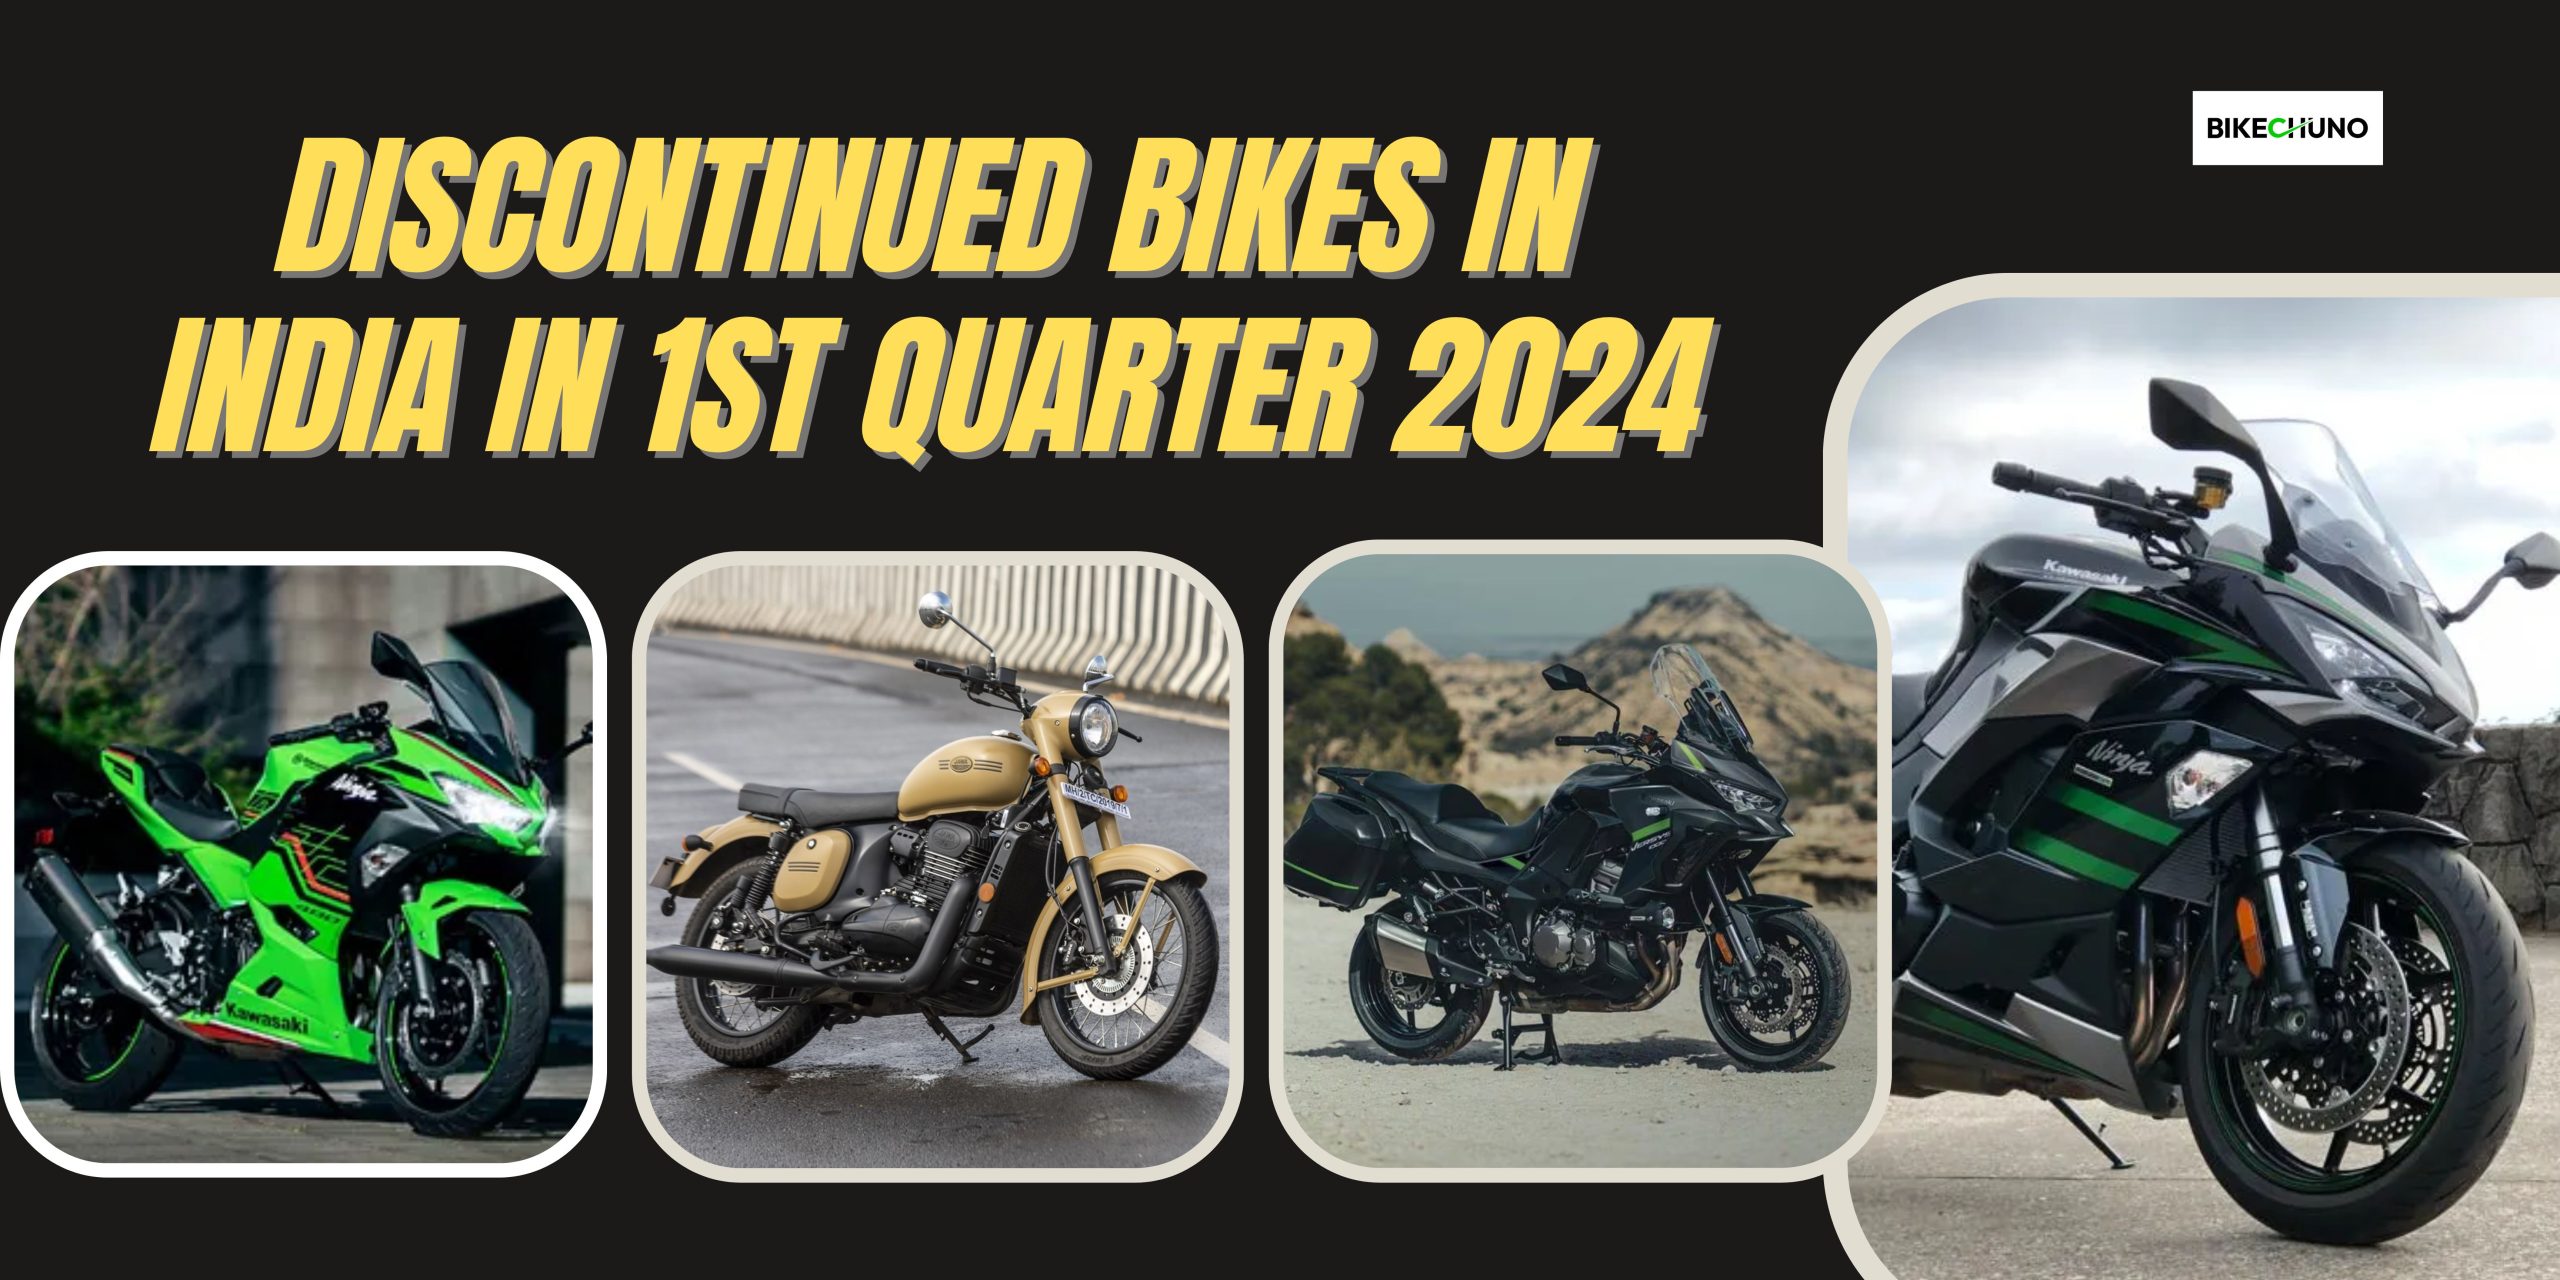 Discontinued Bikes in India in 1st Quarter 2024